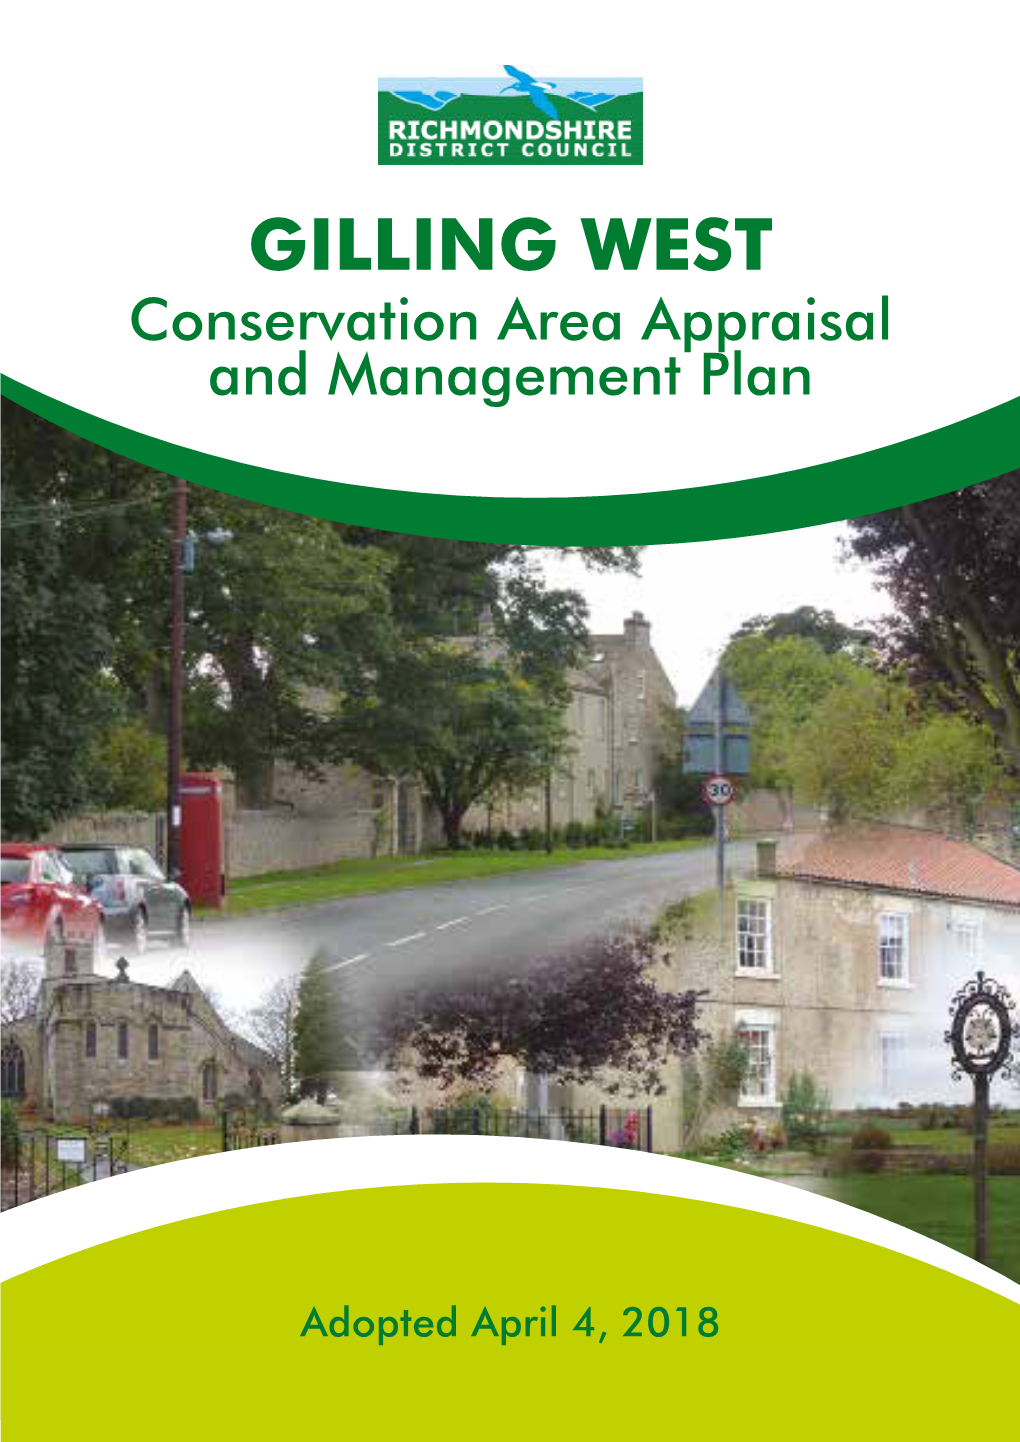 GILLING WEST Conservation Area Appraisal and Management Plan